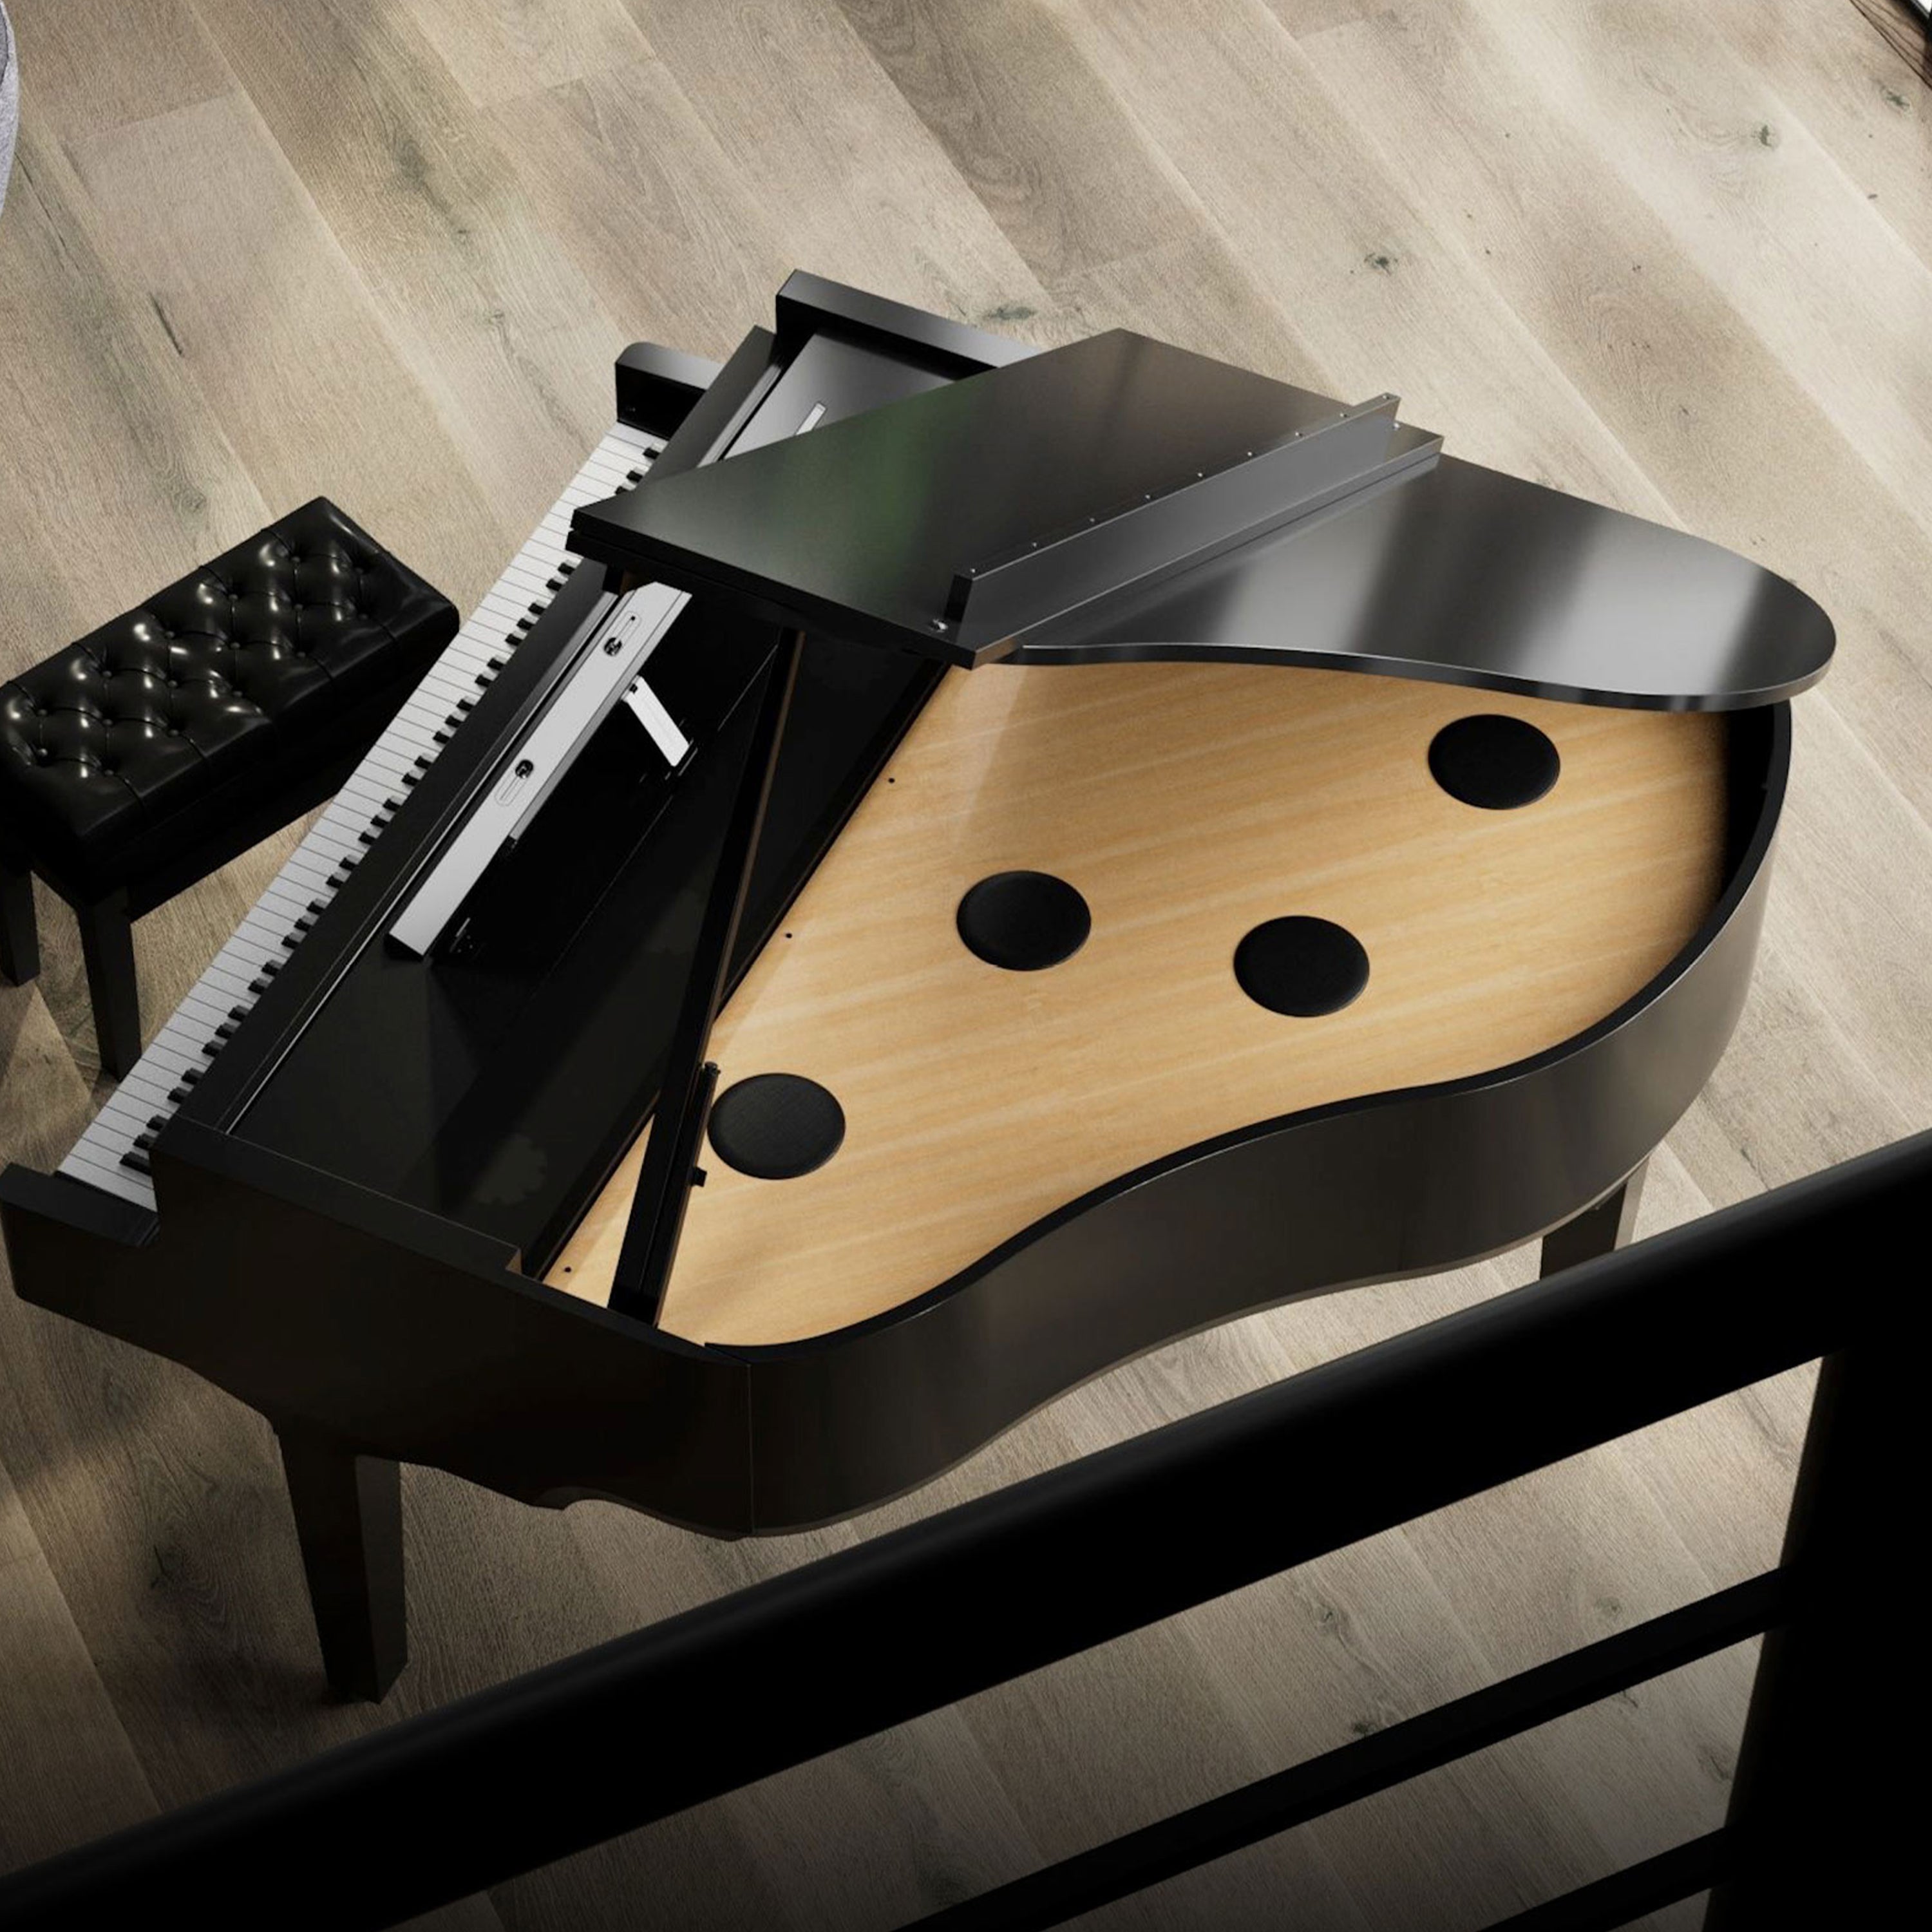 Roland GP-9 Digital Grand Piano - Polished Ebony - from above in a stylish commercial space